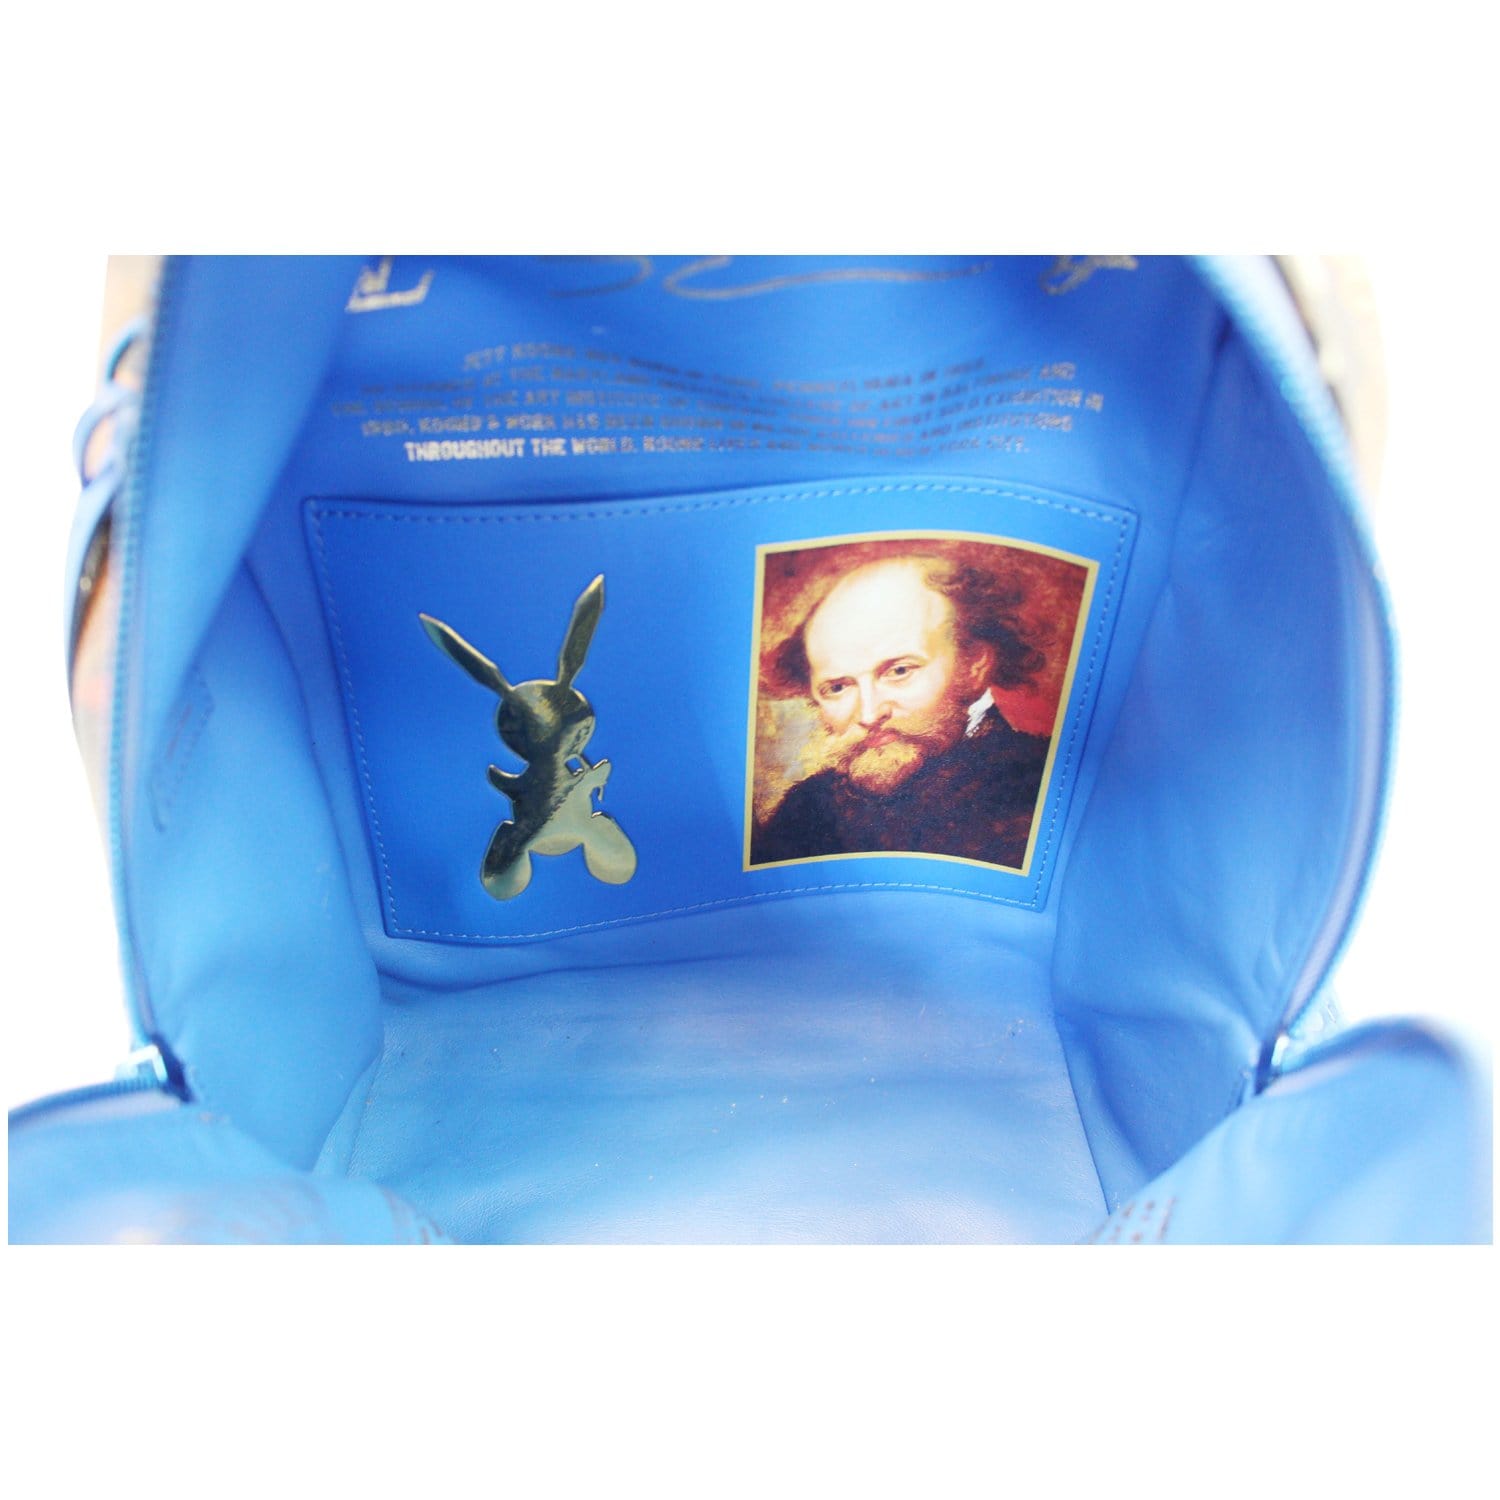 Louis Vuitton Palm Springs Backpack Limited Edition Jeff Koons Rubens Print  Canv